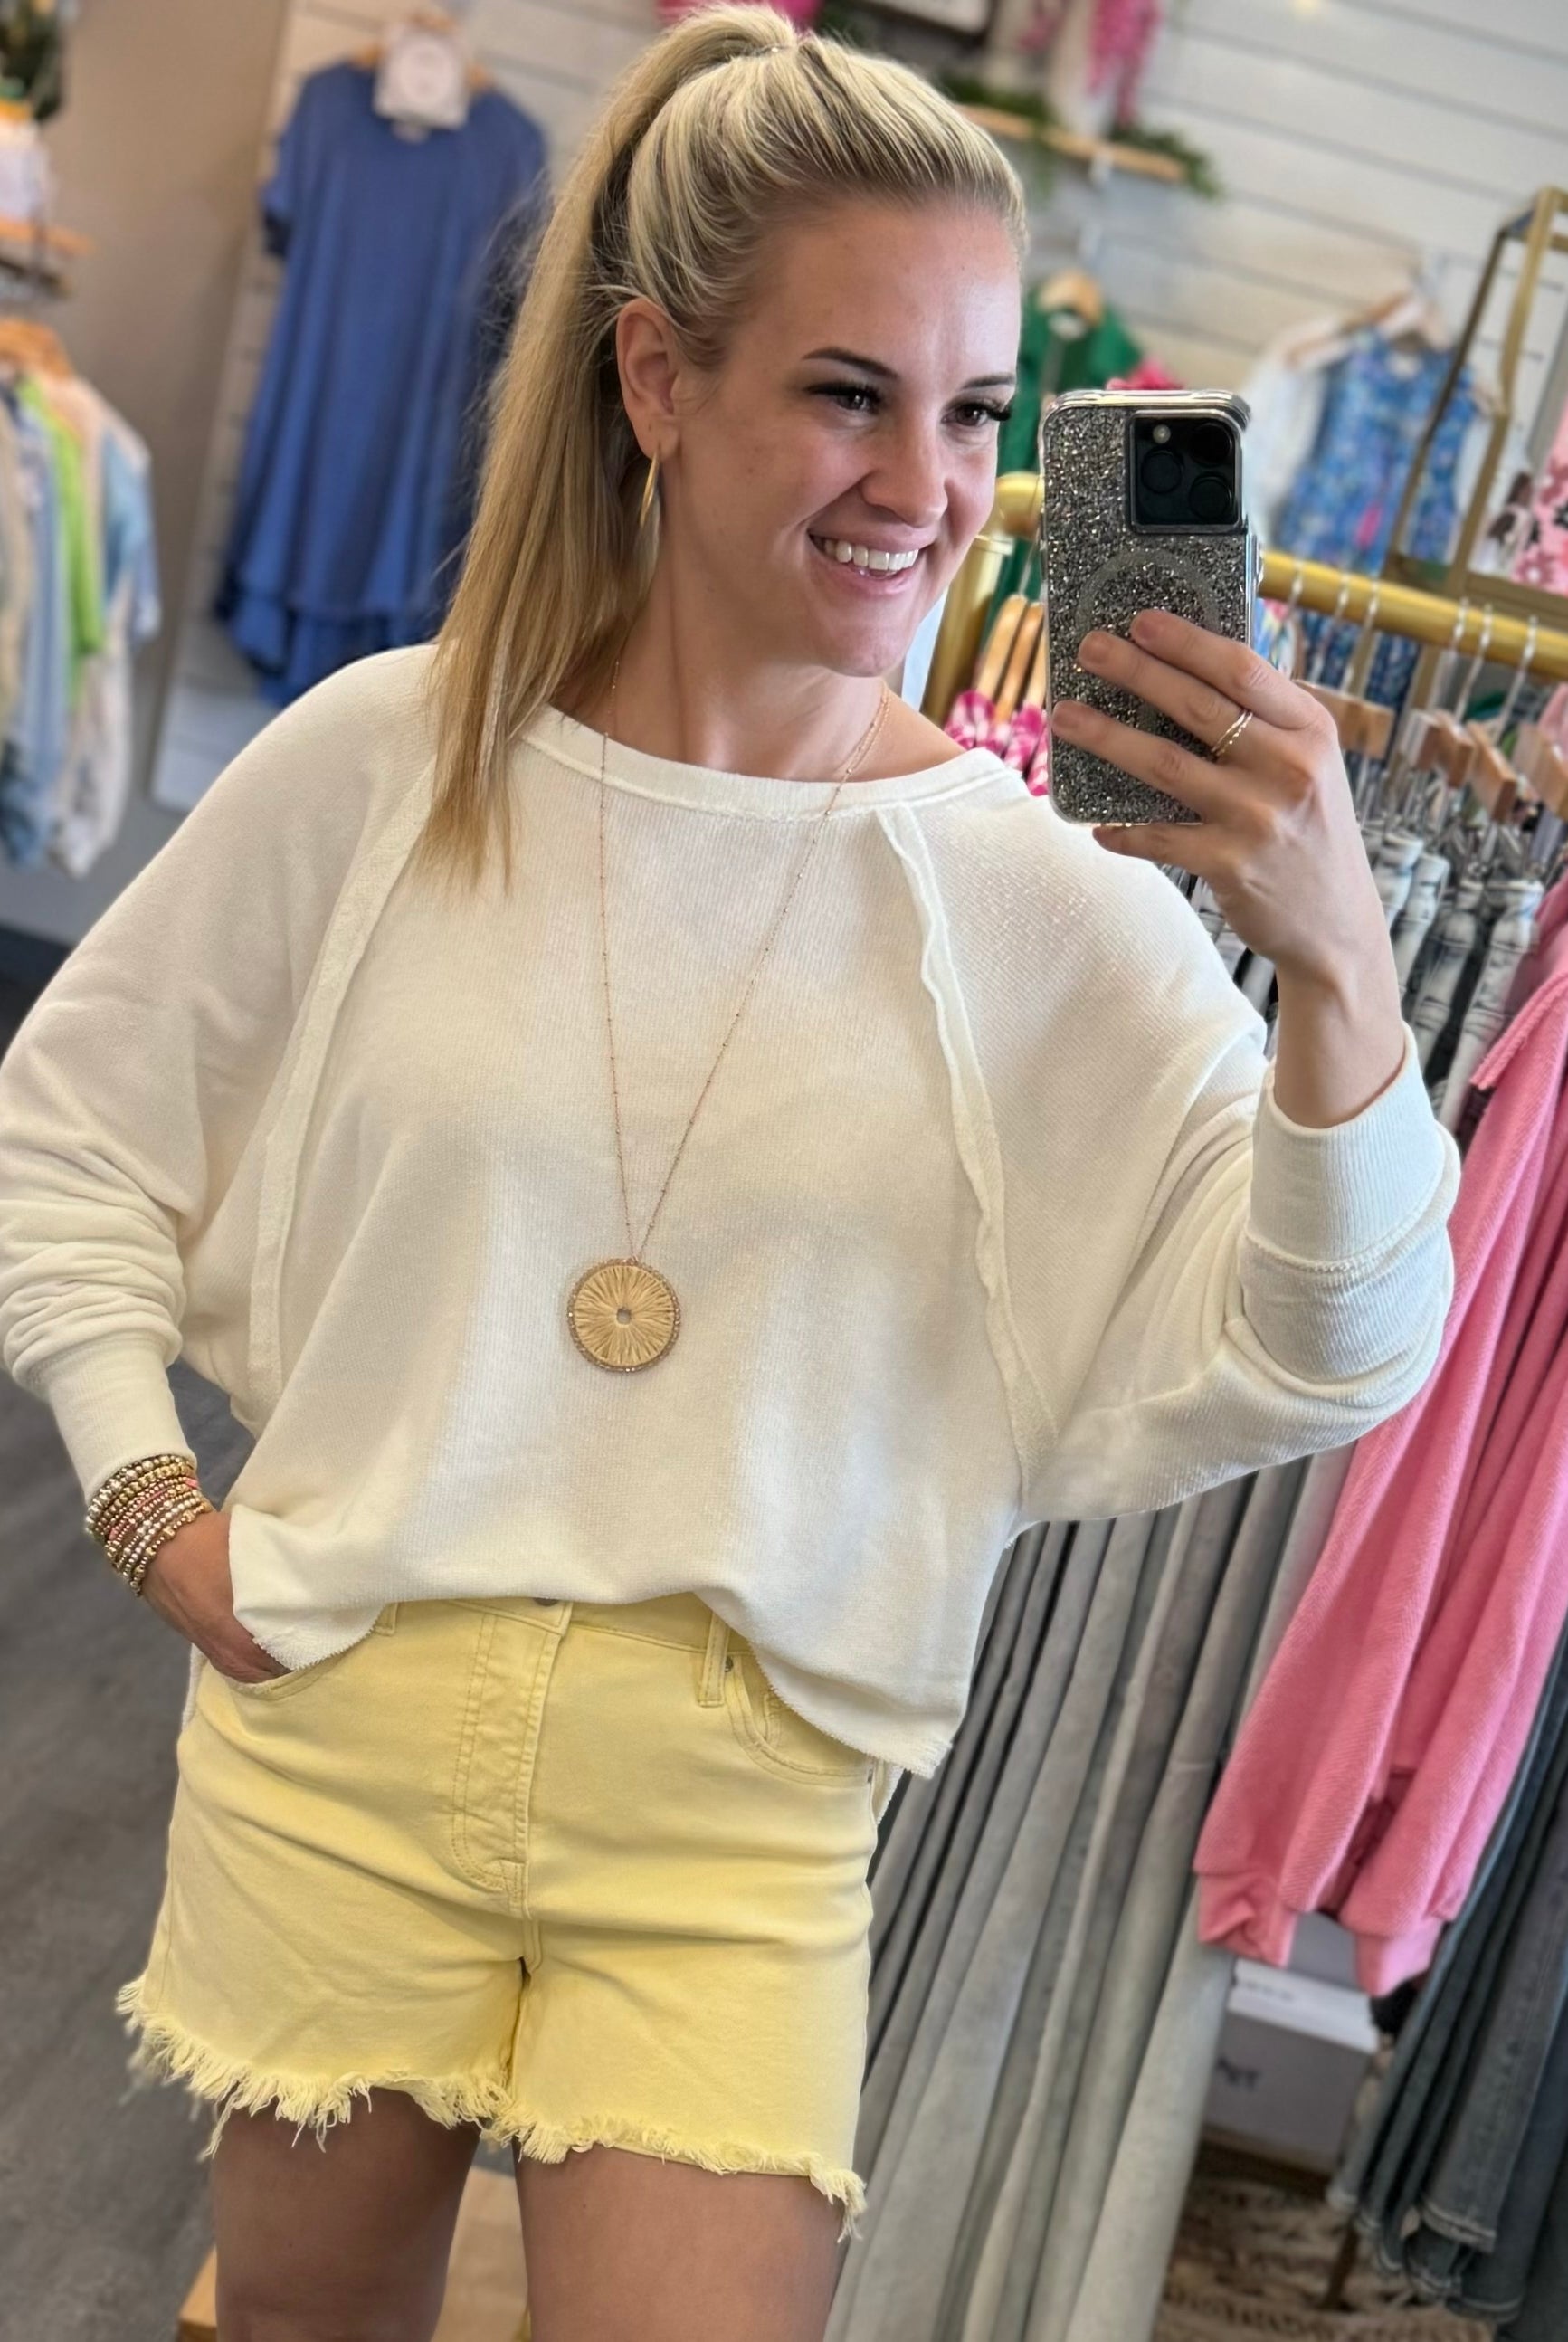 So Simple Pullover-110 Long Sleeve Top-The Lovely Closet-The Lovely Closet, Women's Fashion Boutique in Alexandria, KY